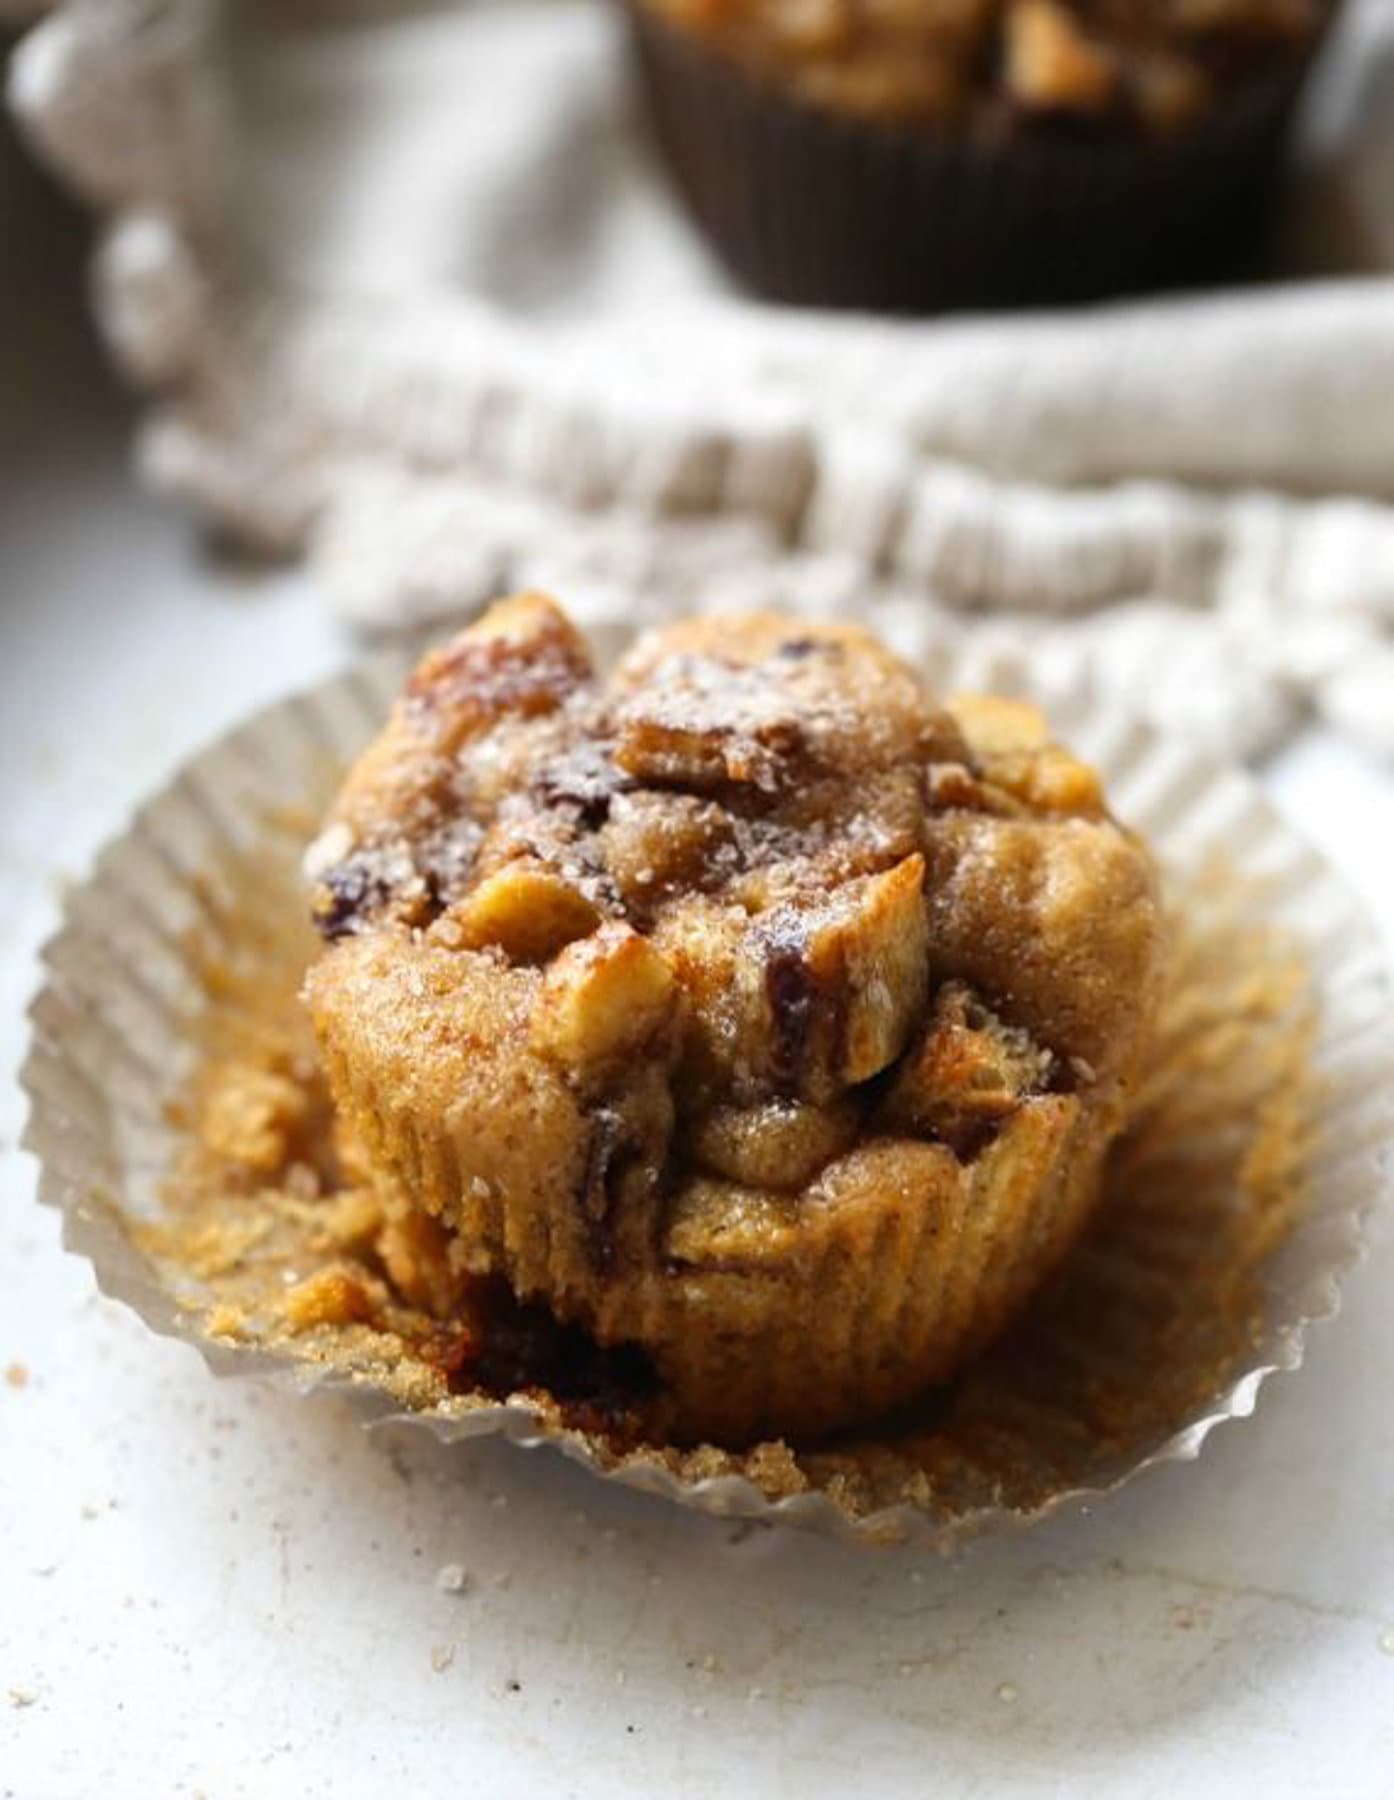 Cinnamon toast muffin served in a muffin wrapper